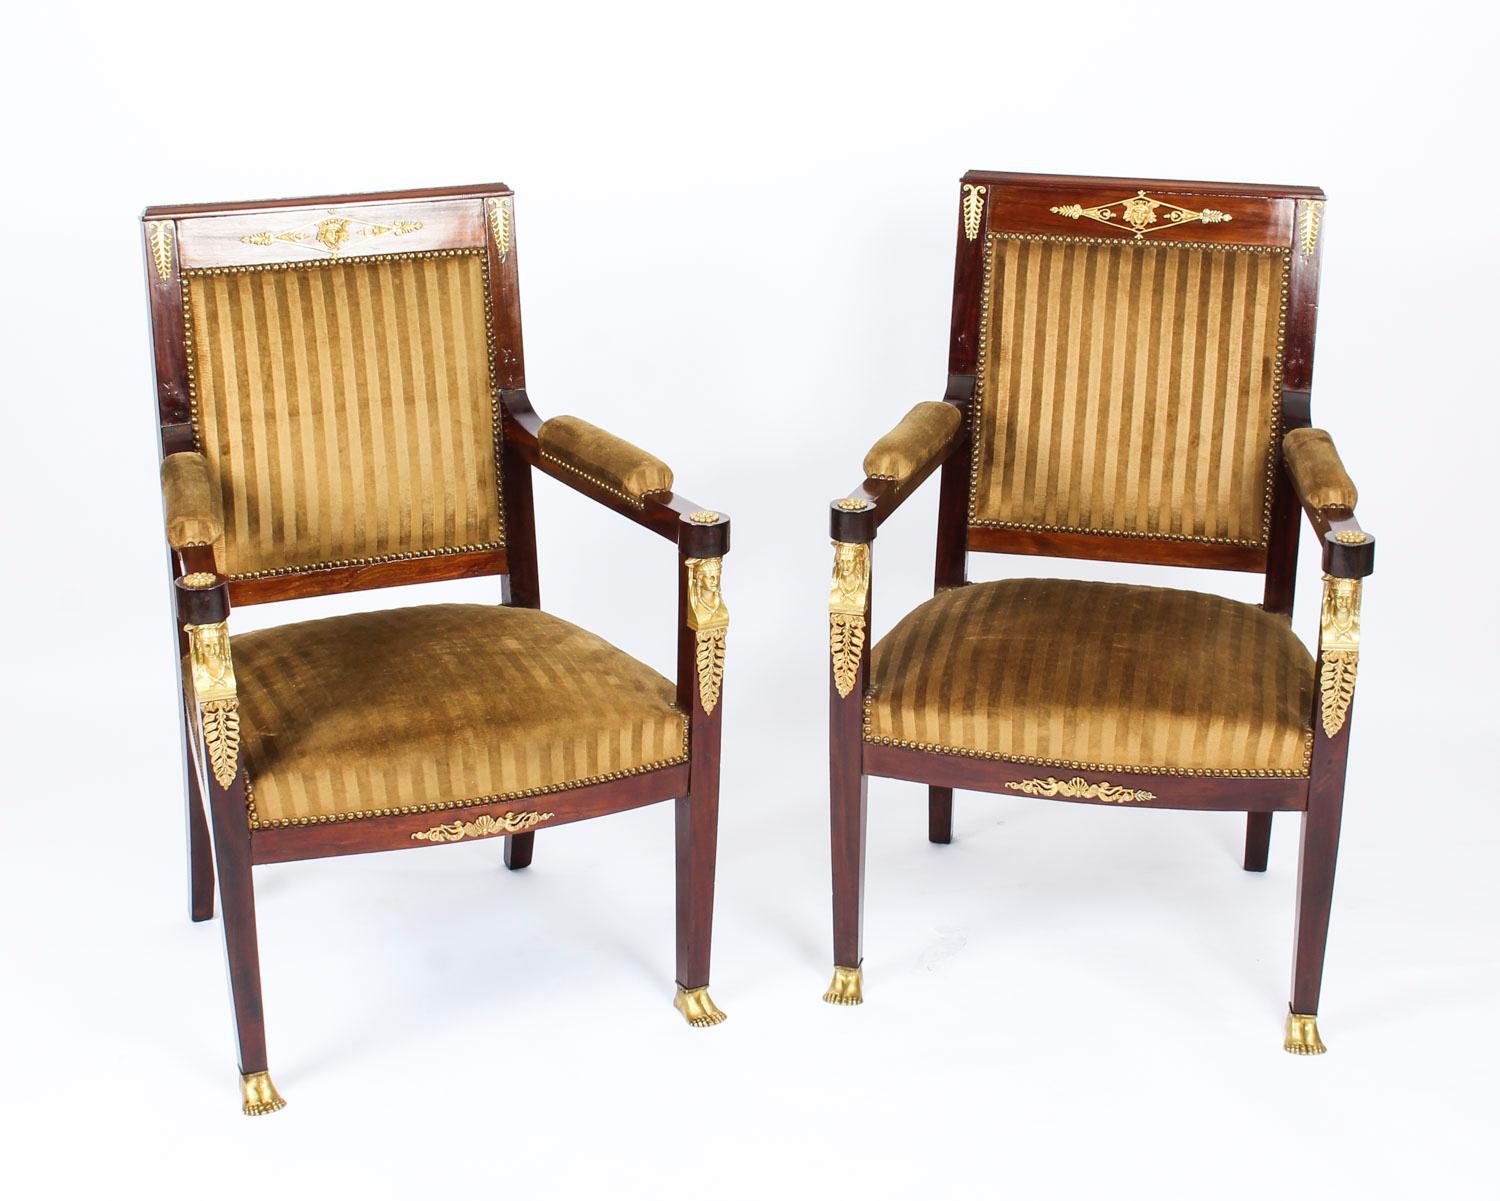 Antique Pair of Empire Revival Ormolu Mounted Armchairs, 19th Century 10